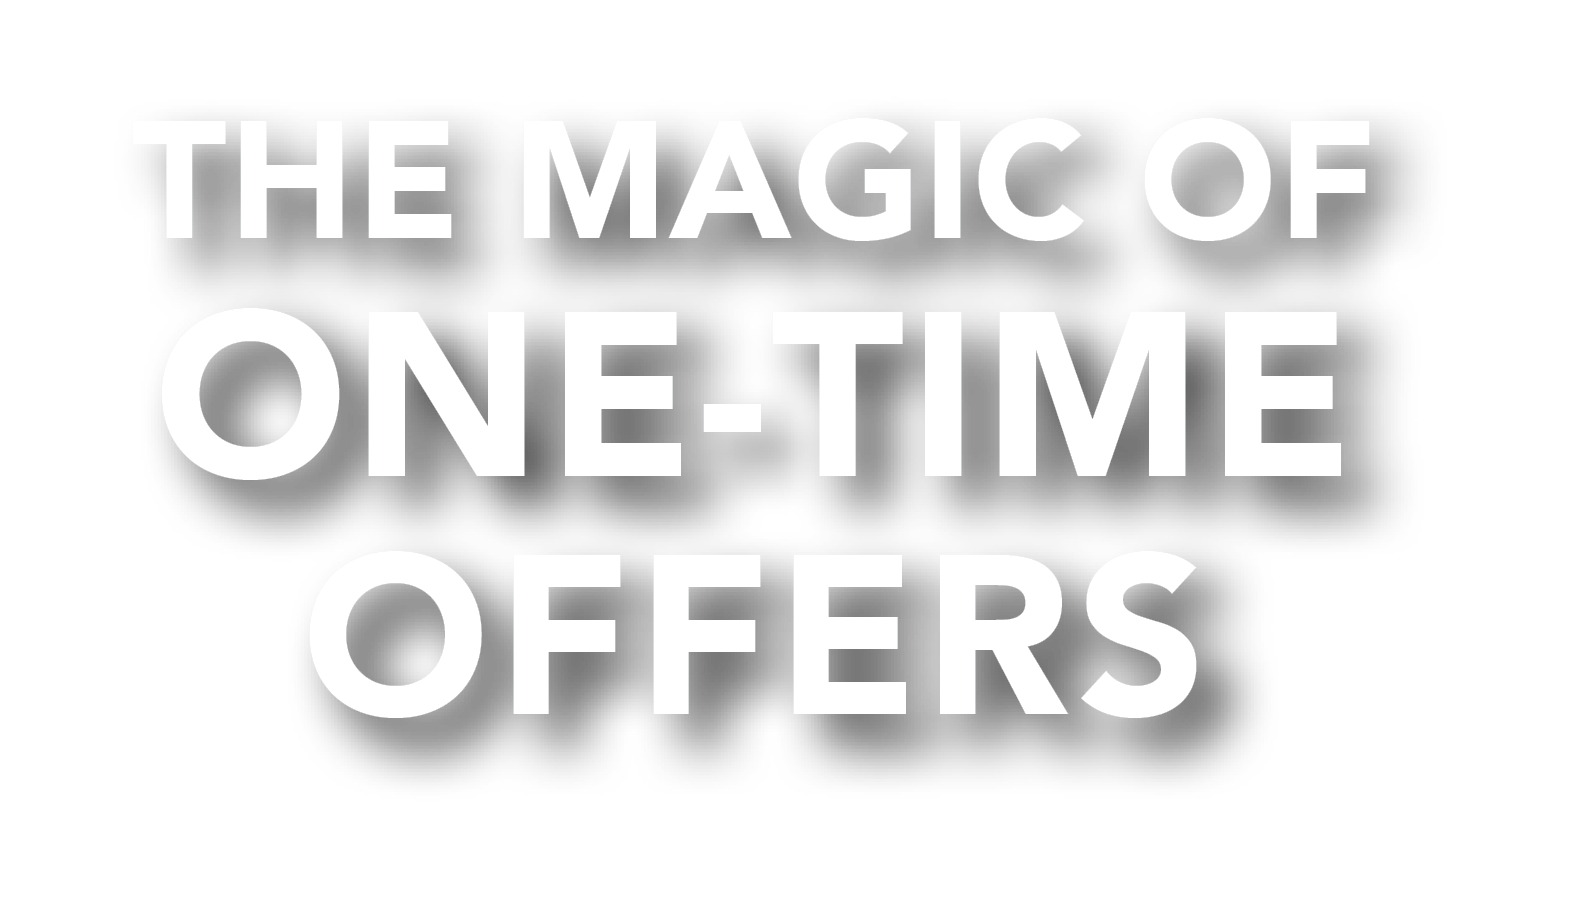 The Magic of One-Time Offers